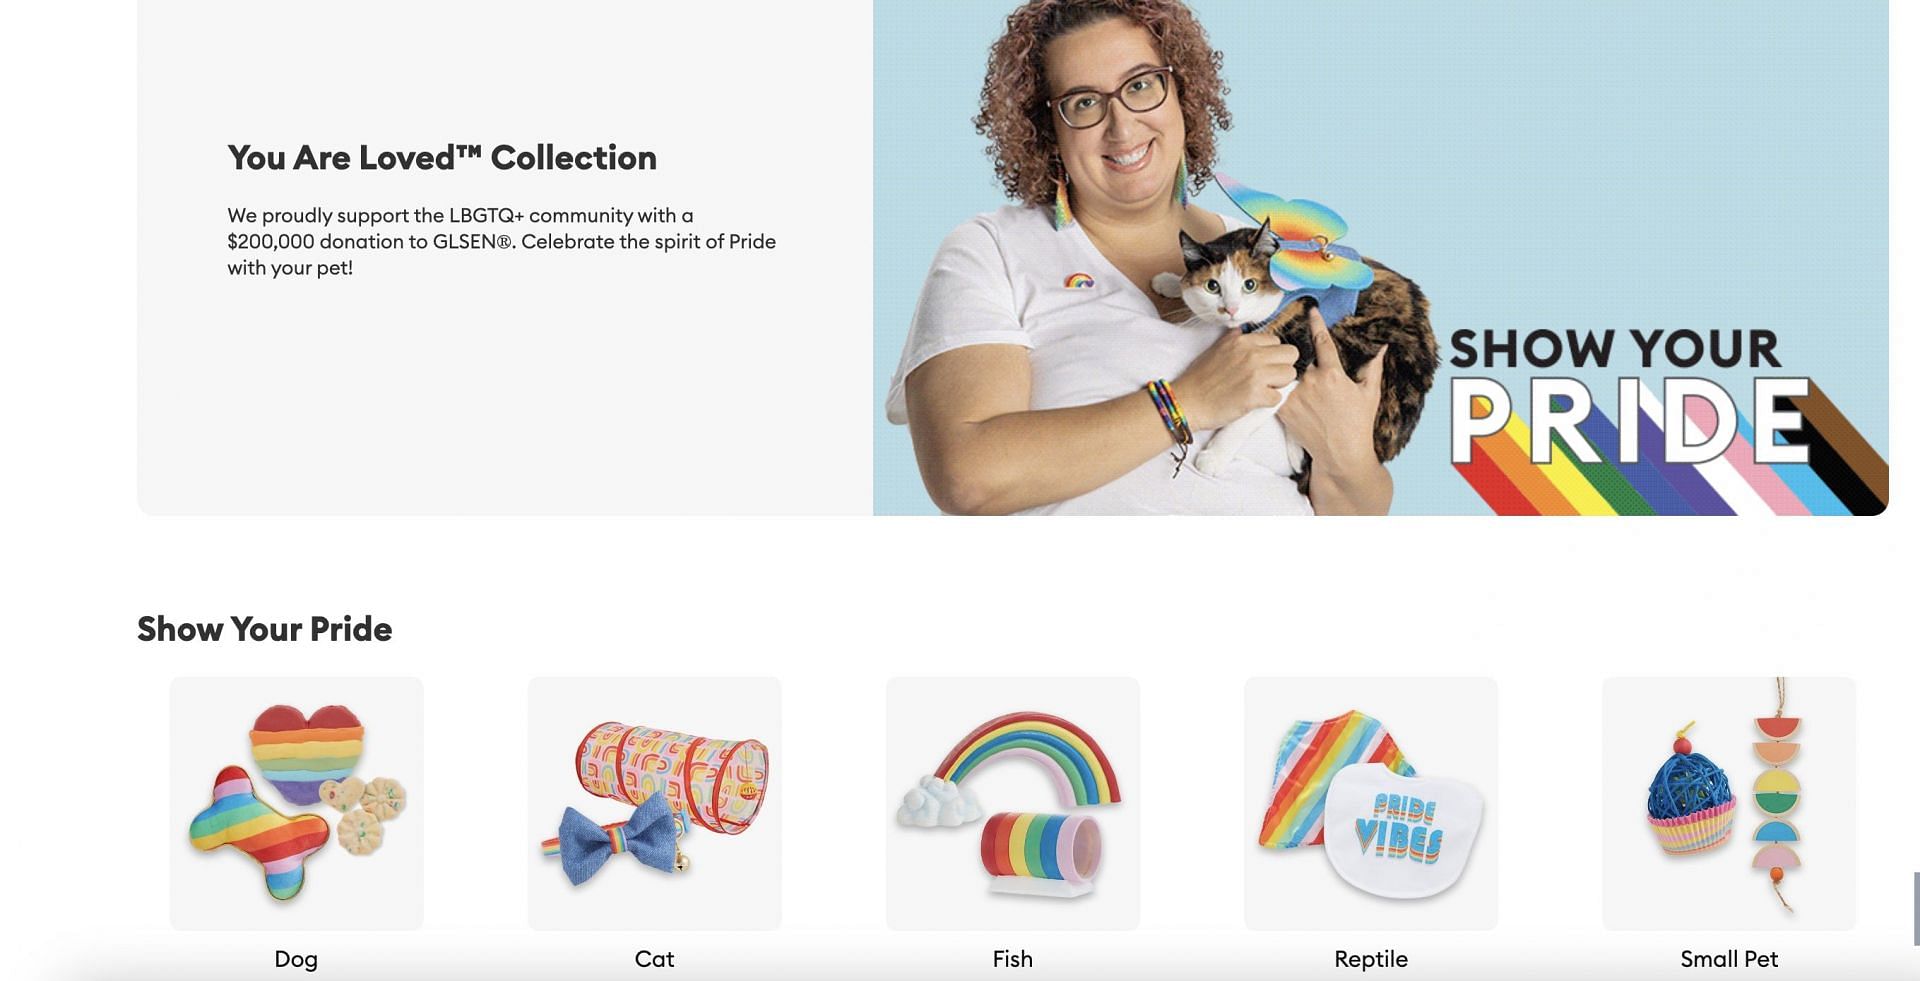 Social media users lash out at Pet Smart for launching Pride merchandise for pets, get slammed online. (Image via Twitter)